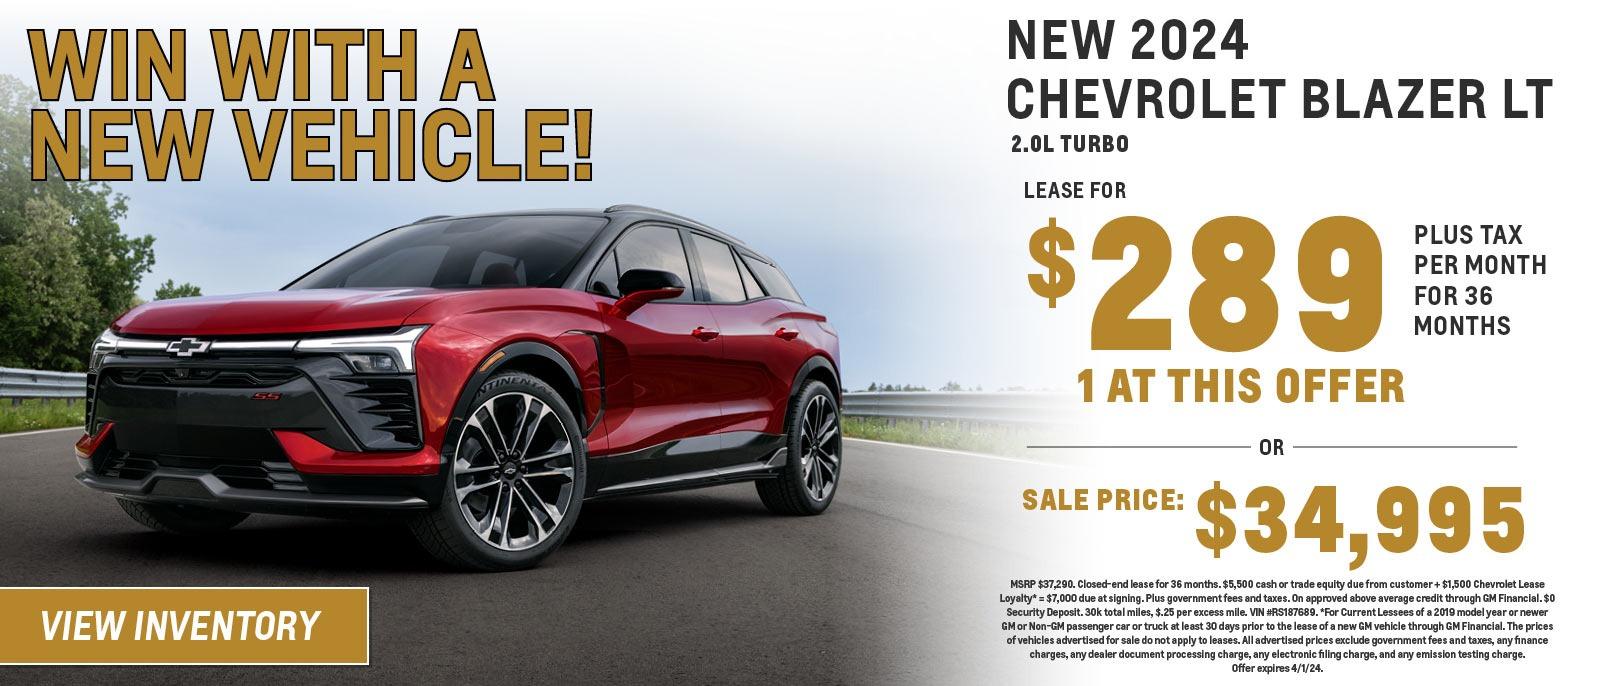 New 2024 Chevrolet Blazer LT
Lease for $289 plus tax per month for 36 months
1 at this offer
0r
Sale Price $34,995